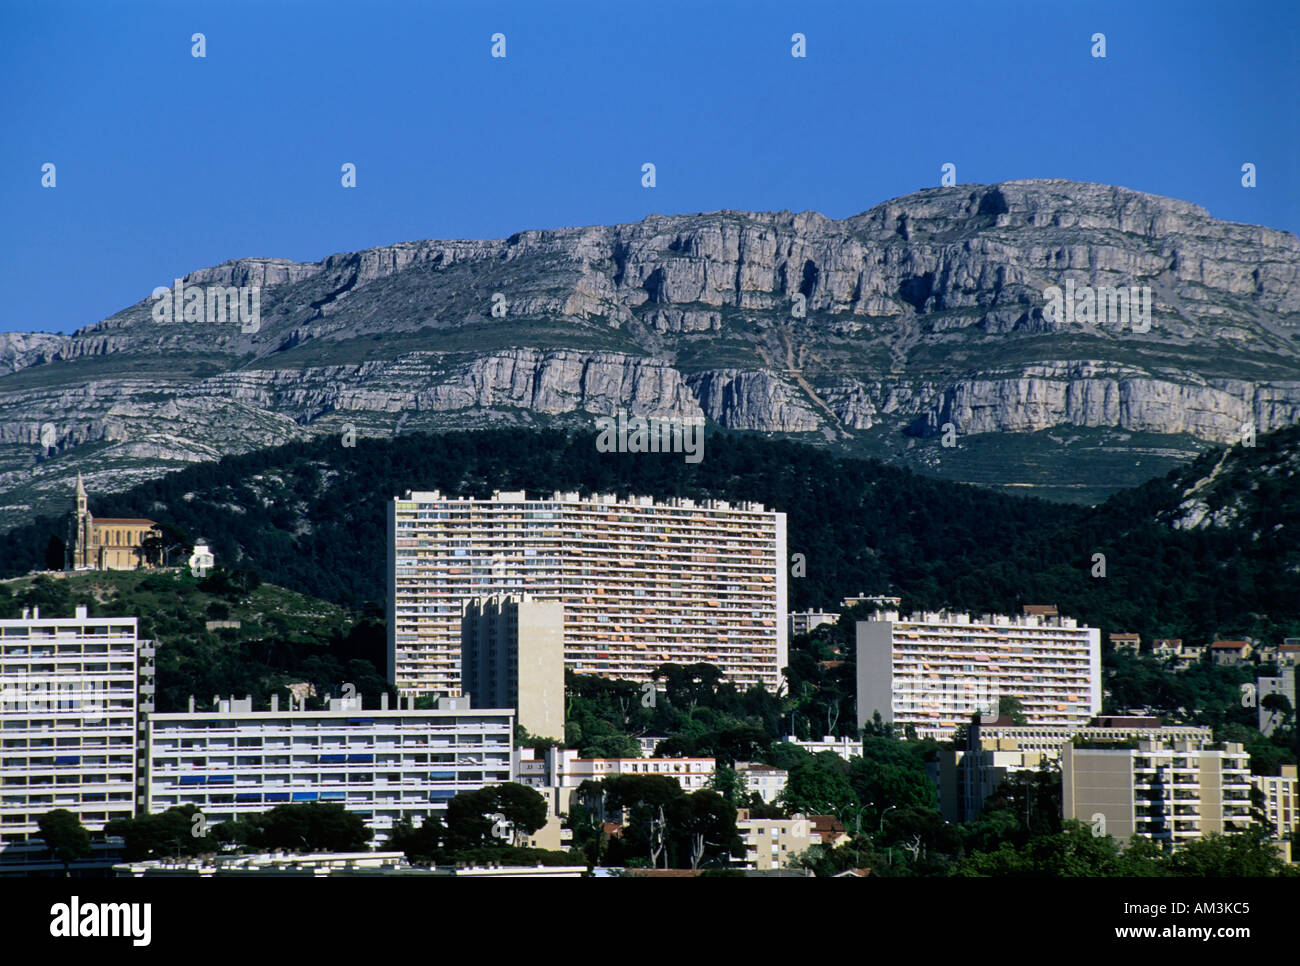 France Marseille Redon District With Saint Joseph Du Redon Church On A Hill From The Cité Radieuse By Le Corbusier Architect Stock Photo